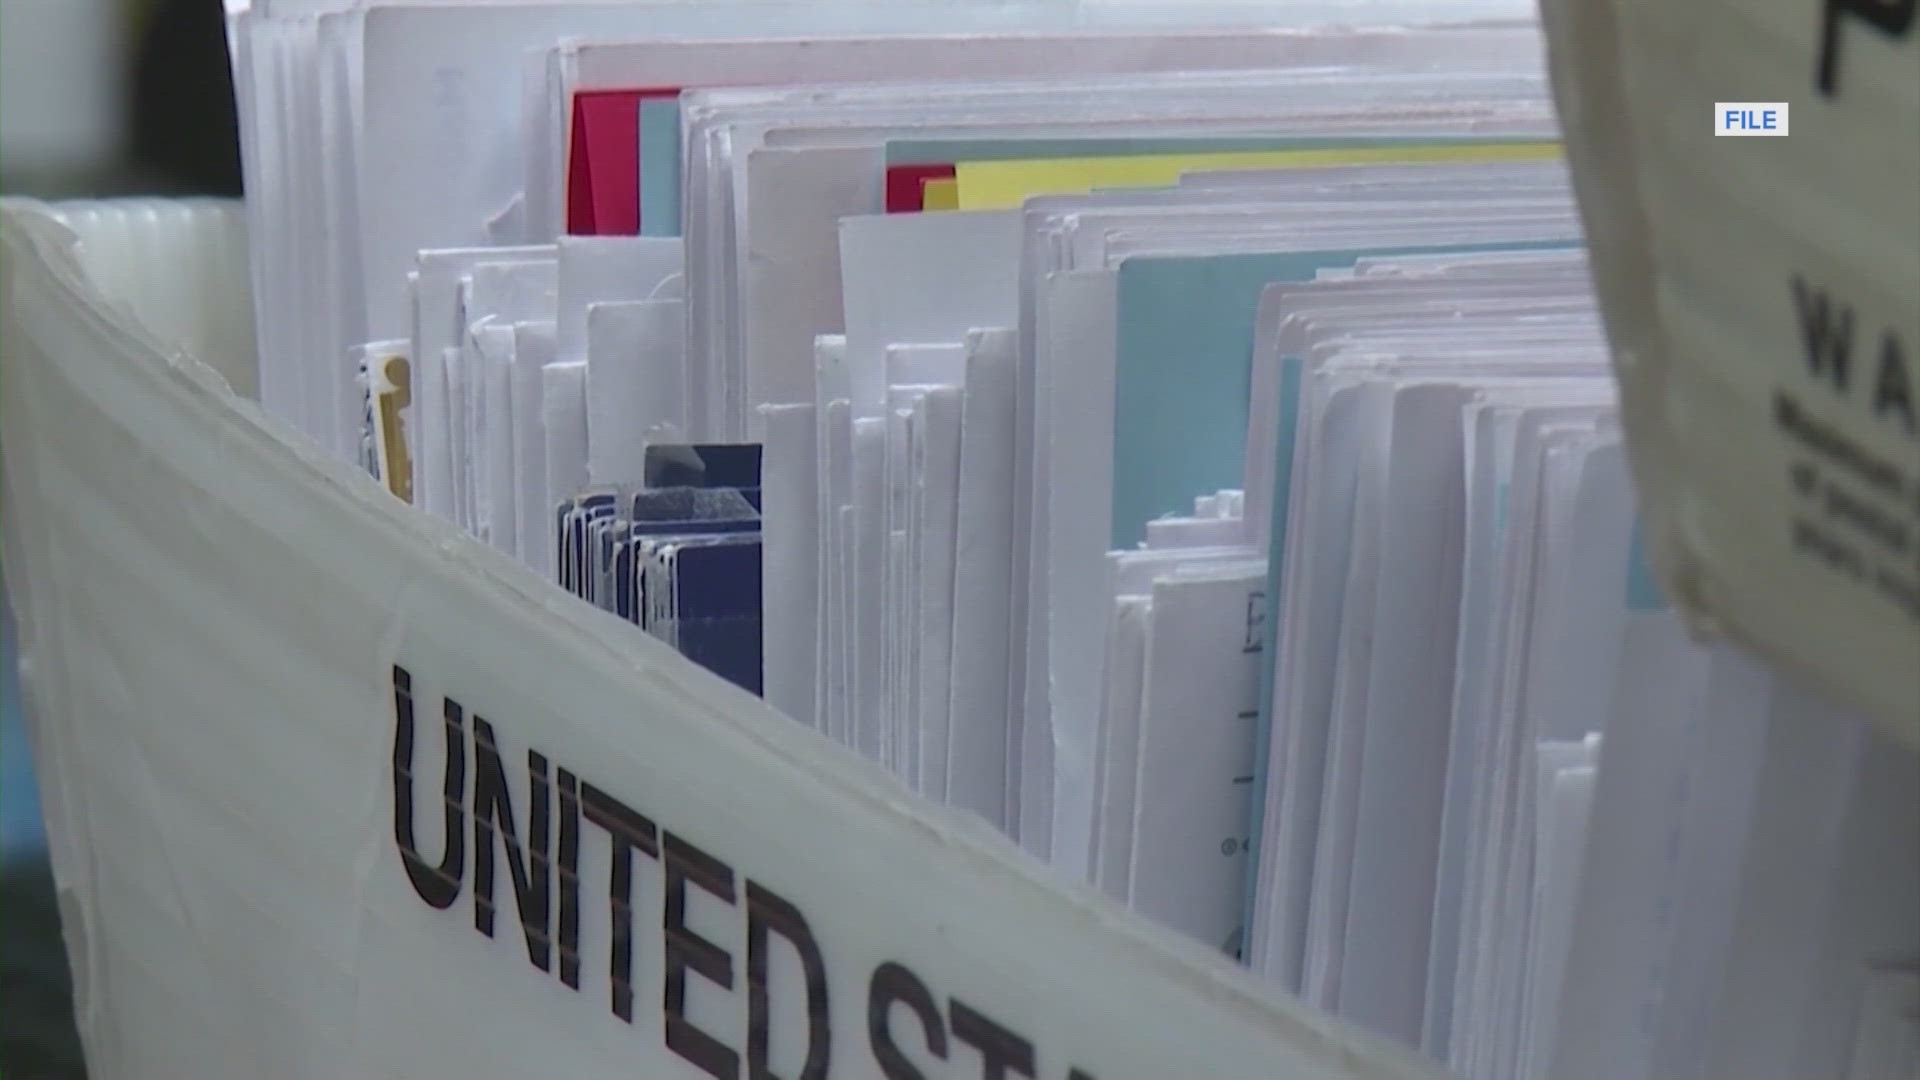 KHOU 11 spoke to the Harris County Clerk Teneshia Hudsmith, who said there are concerns, but that there are ways to be sure your ballot arrives in time.